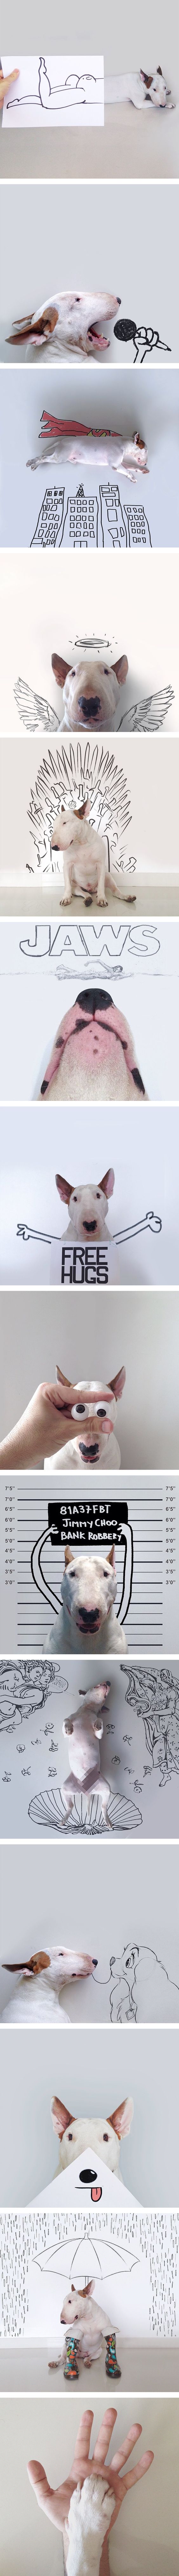 Dog Owner Creates Funny Illustrations Will His Bull Terrier And They Are Awesome